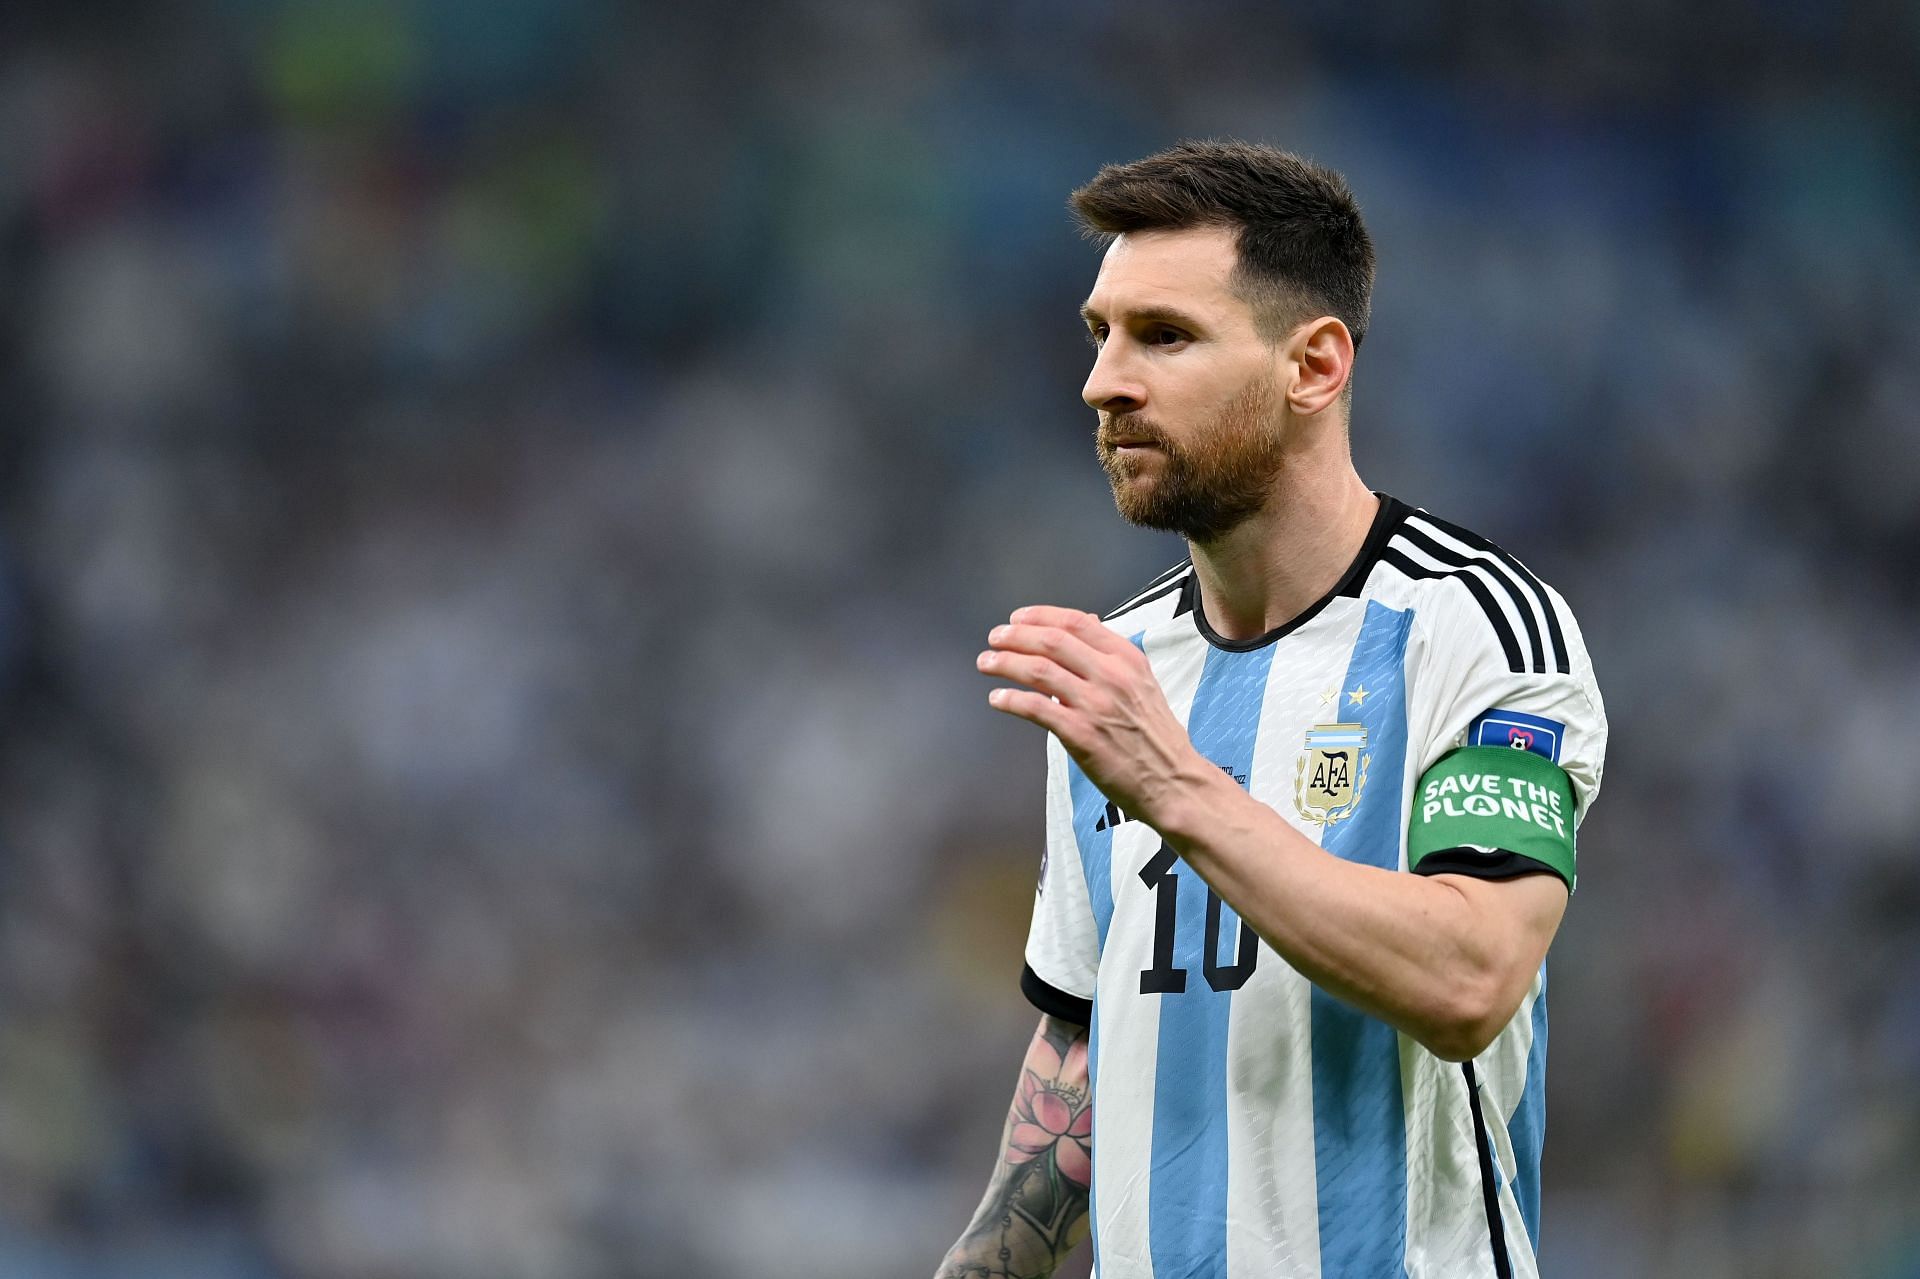 Lionel Messi is expected to make a decision on his future after the World Cup.